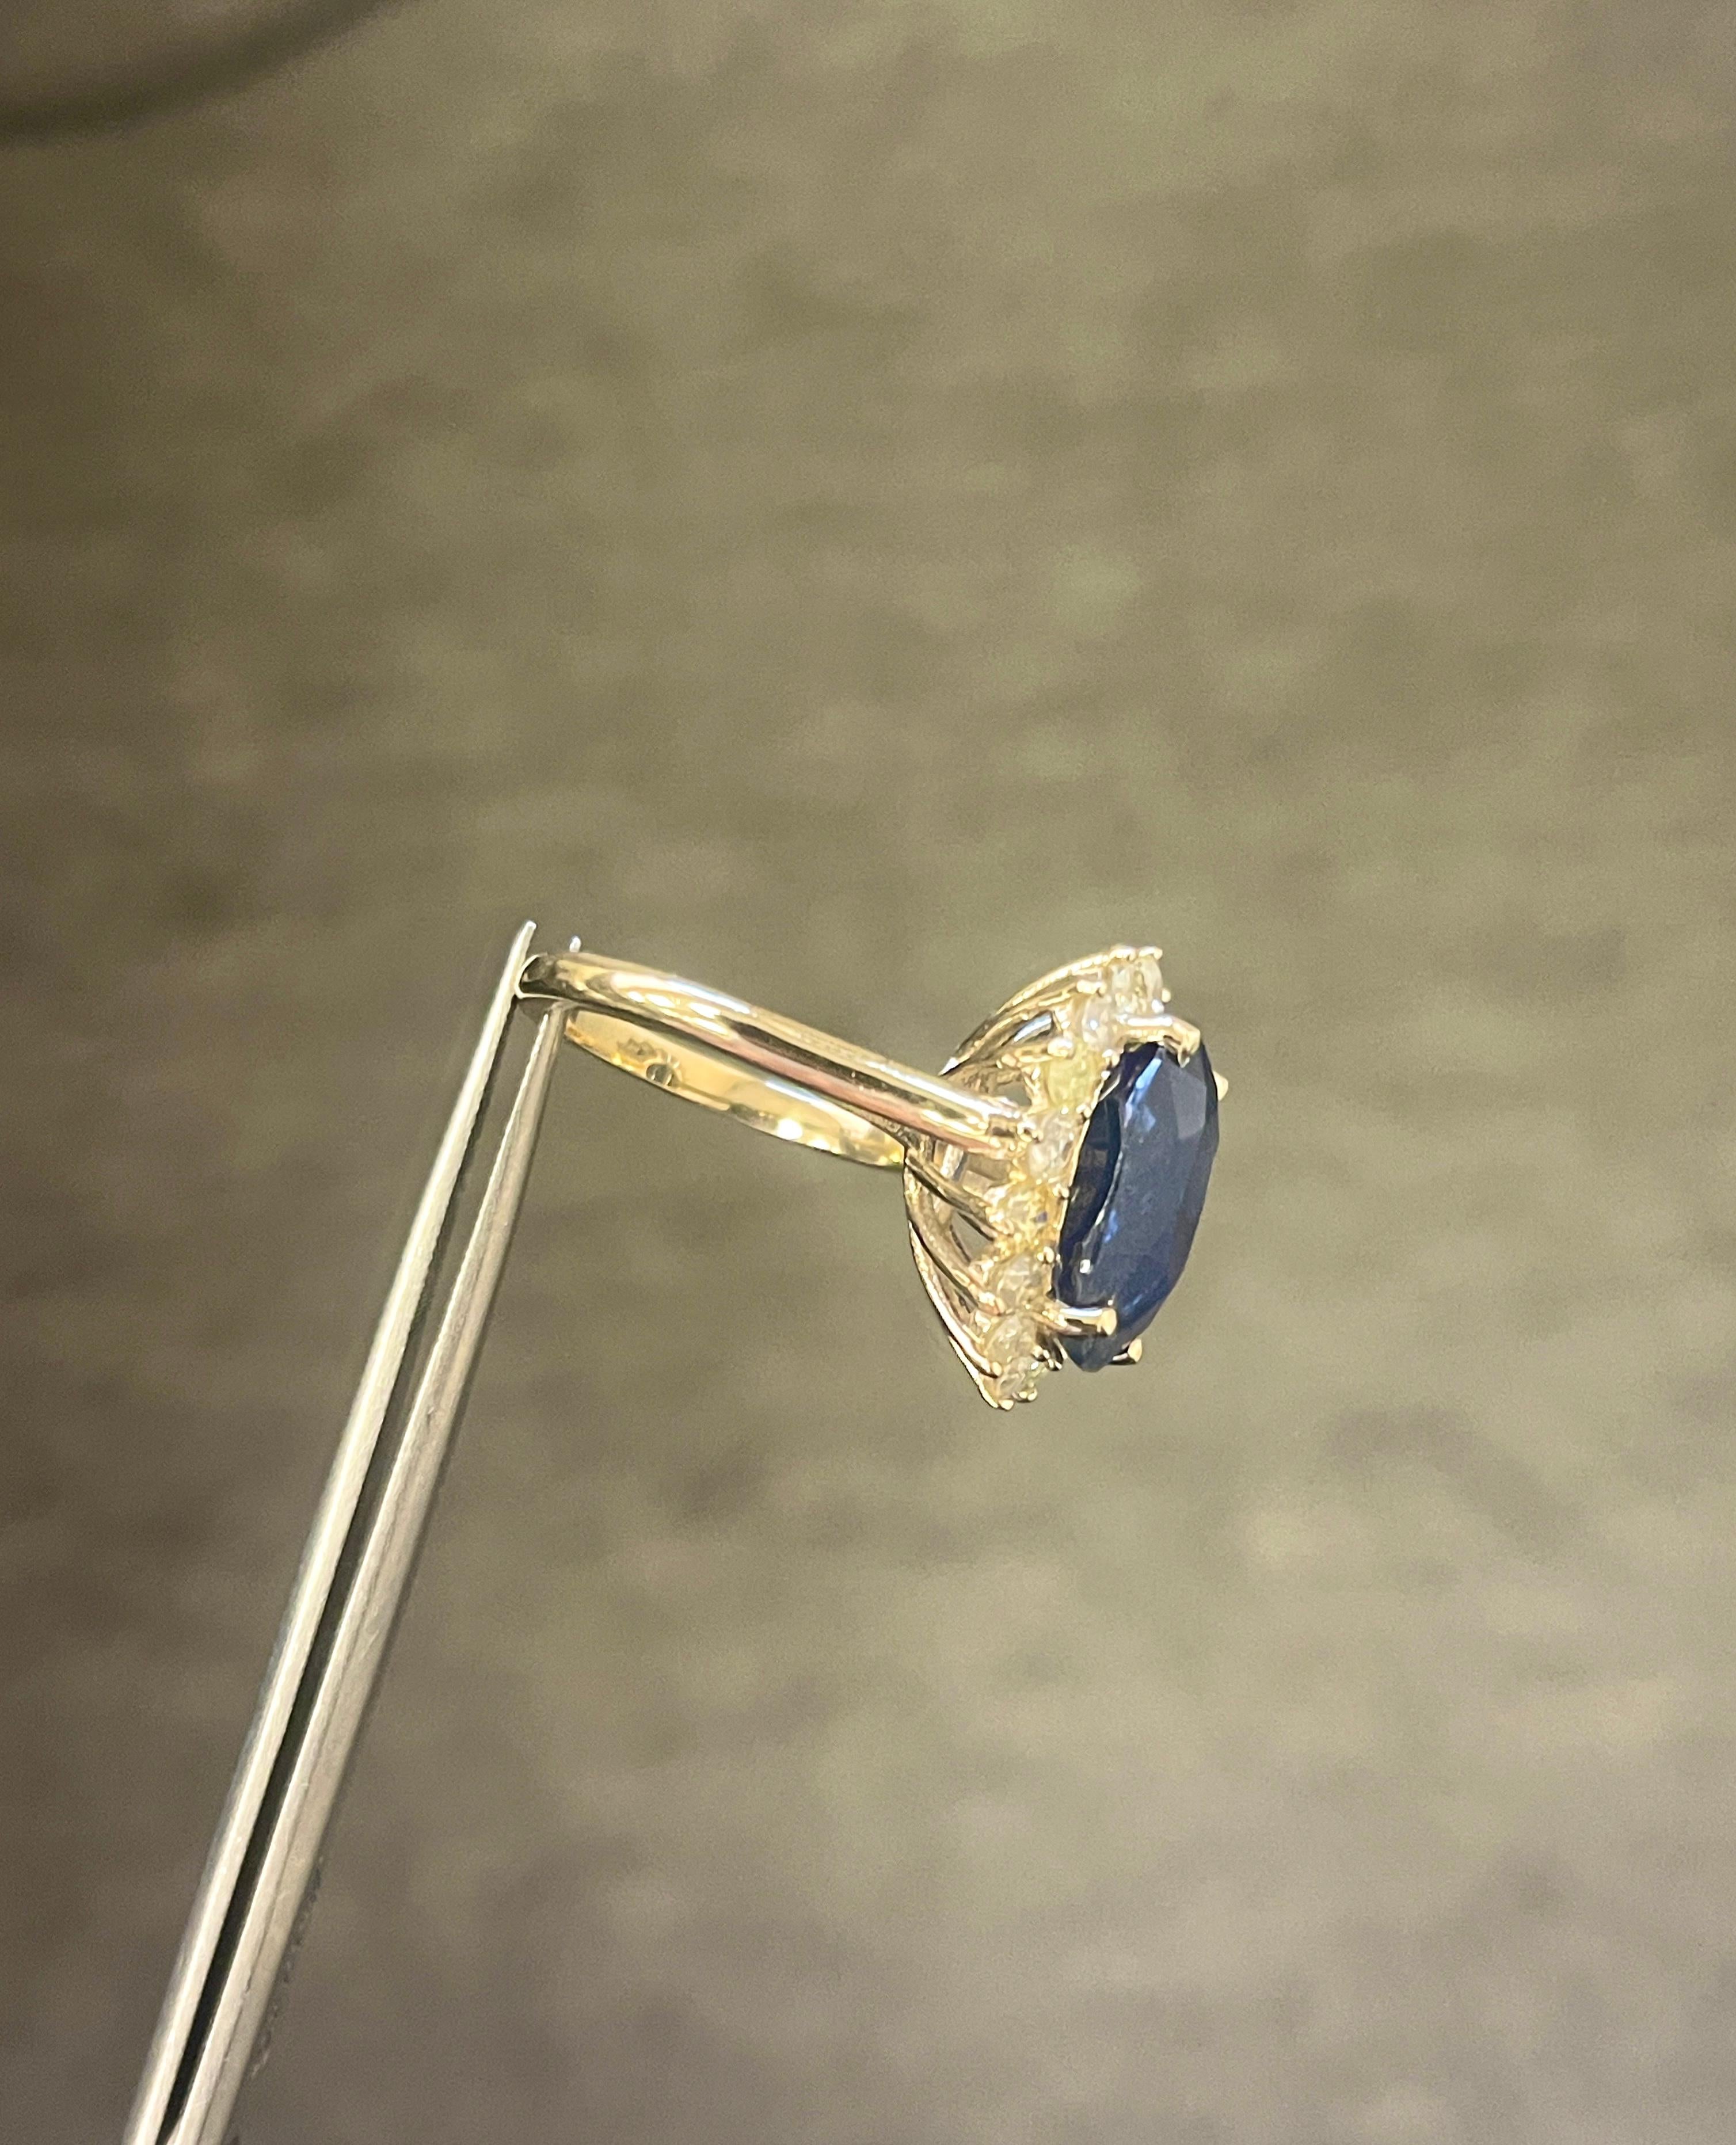 8.71 Carat Intense Blue Oval Cut Natural Sapphire 14K Yellow Gold Diamond Ring For Sale 5